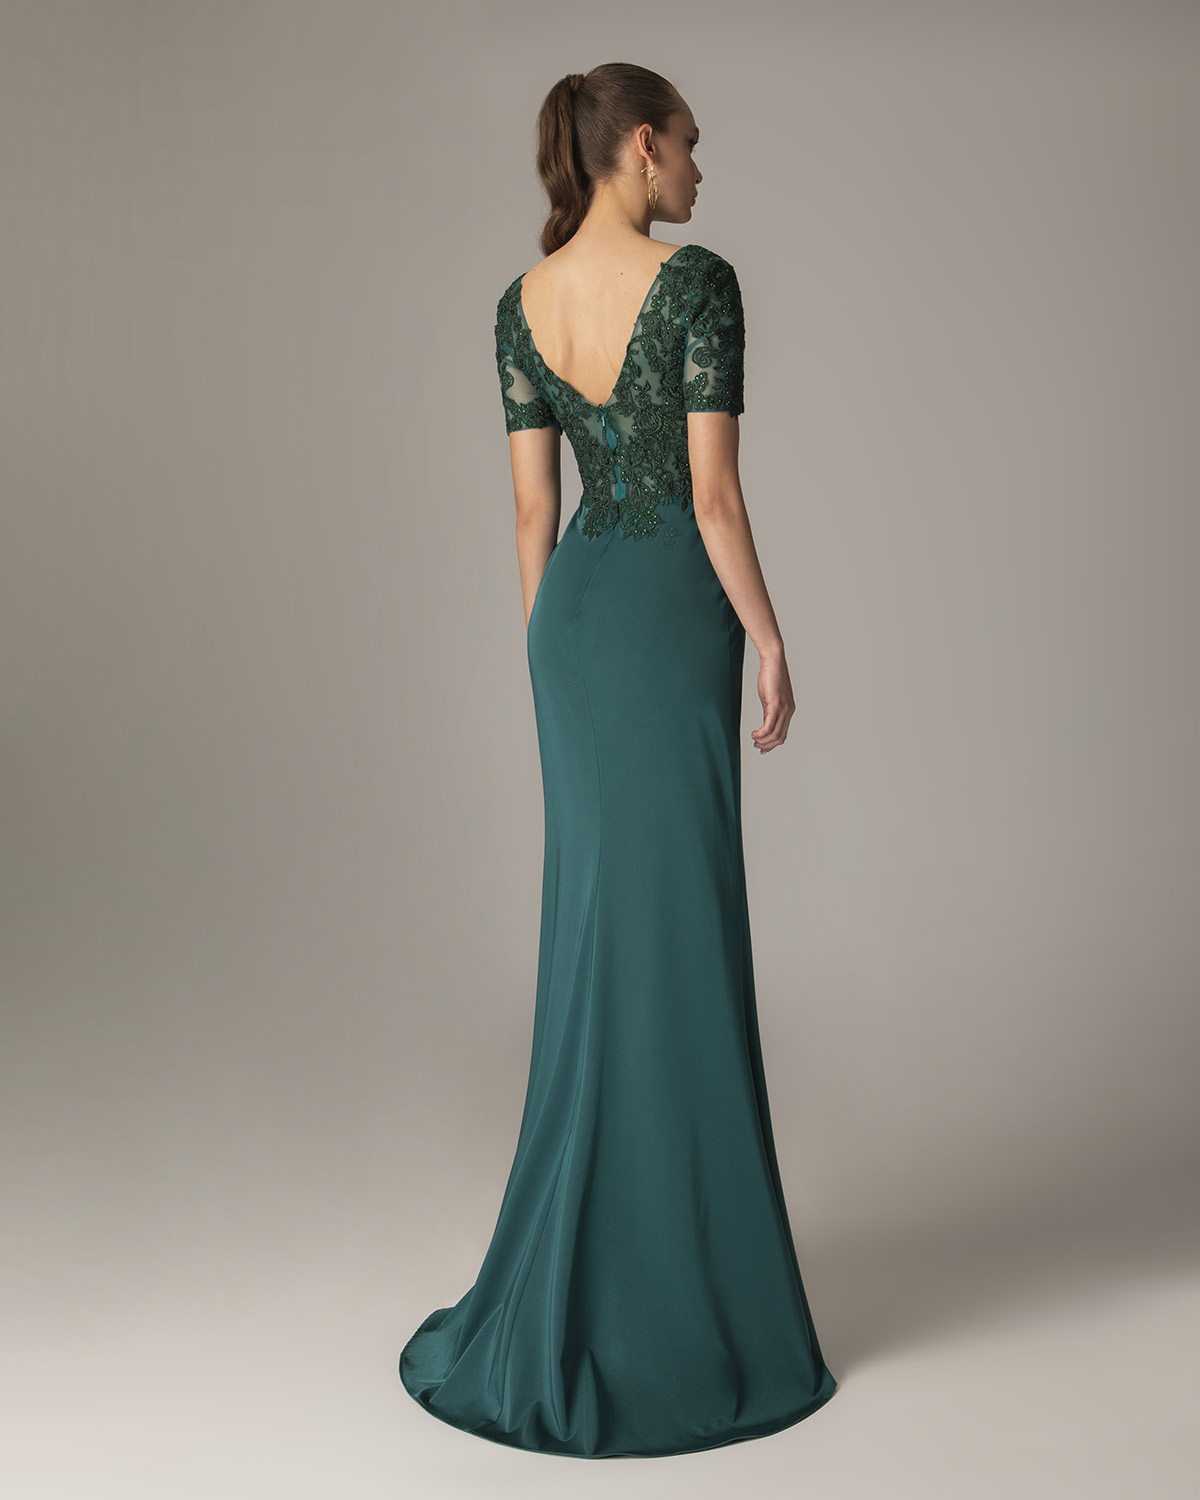 Classic Dresses / Long satin dress with short sleeves and applique beaded lace on the top